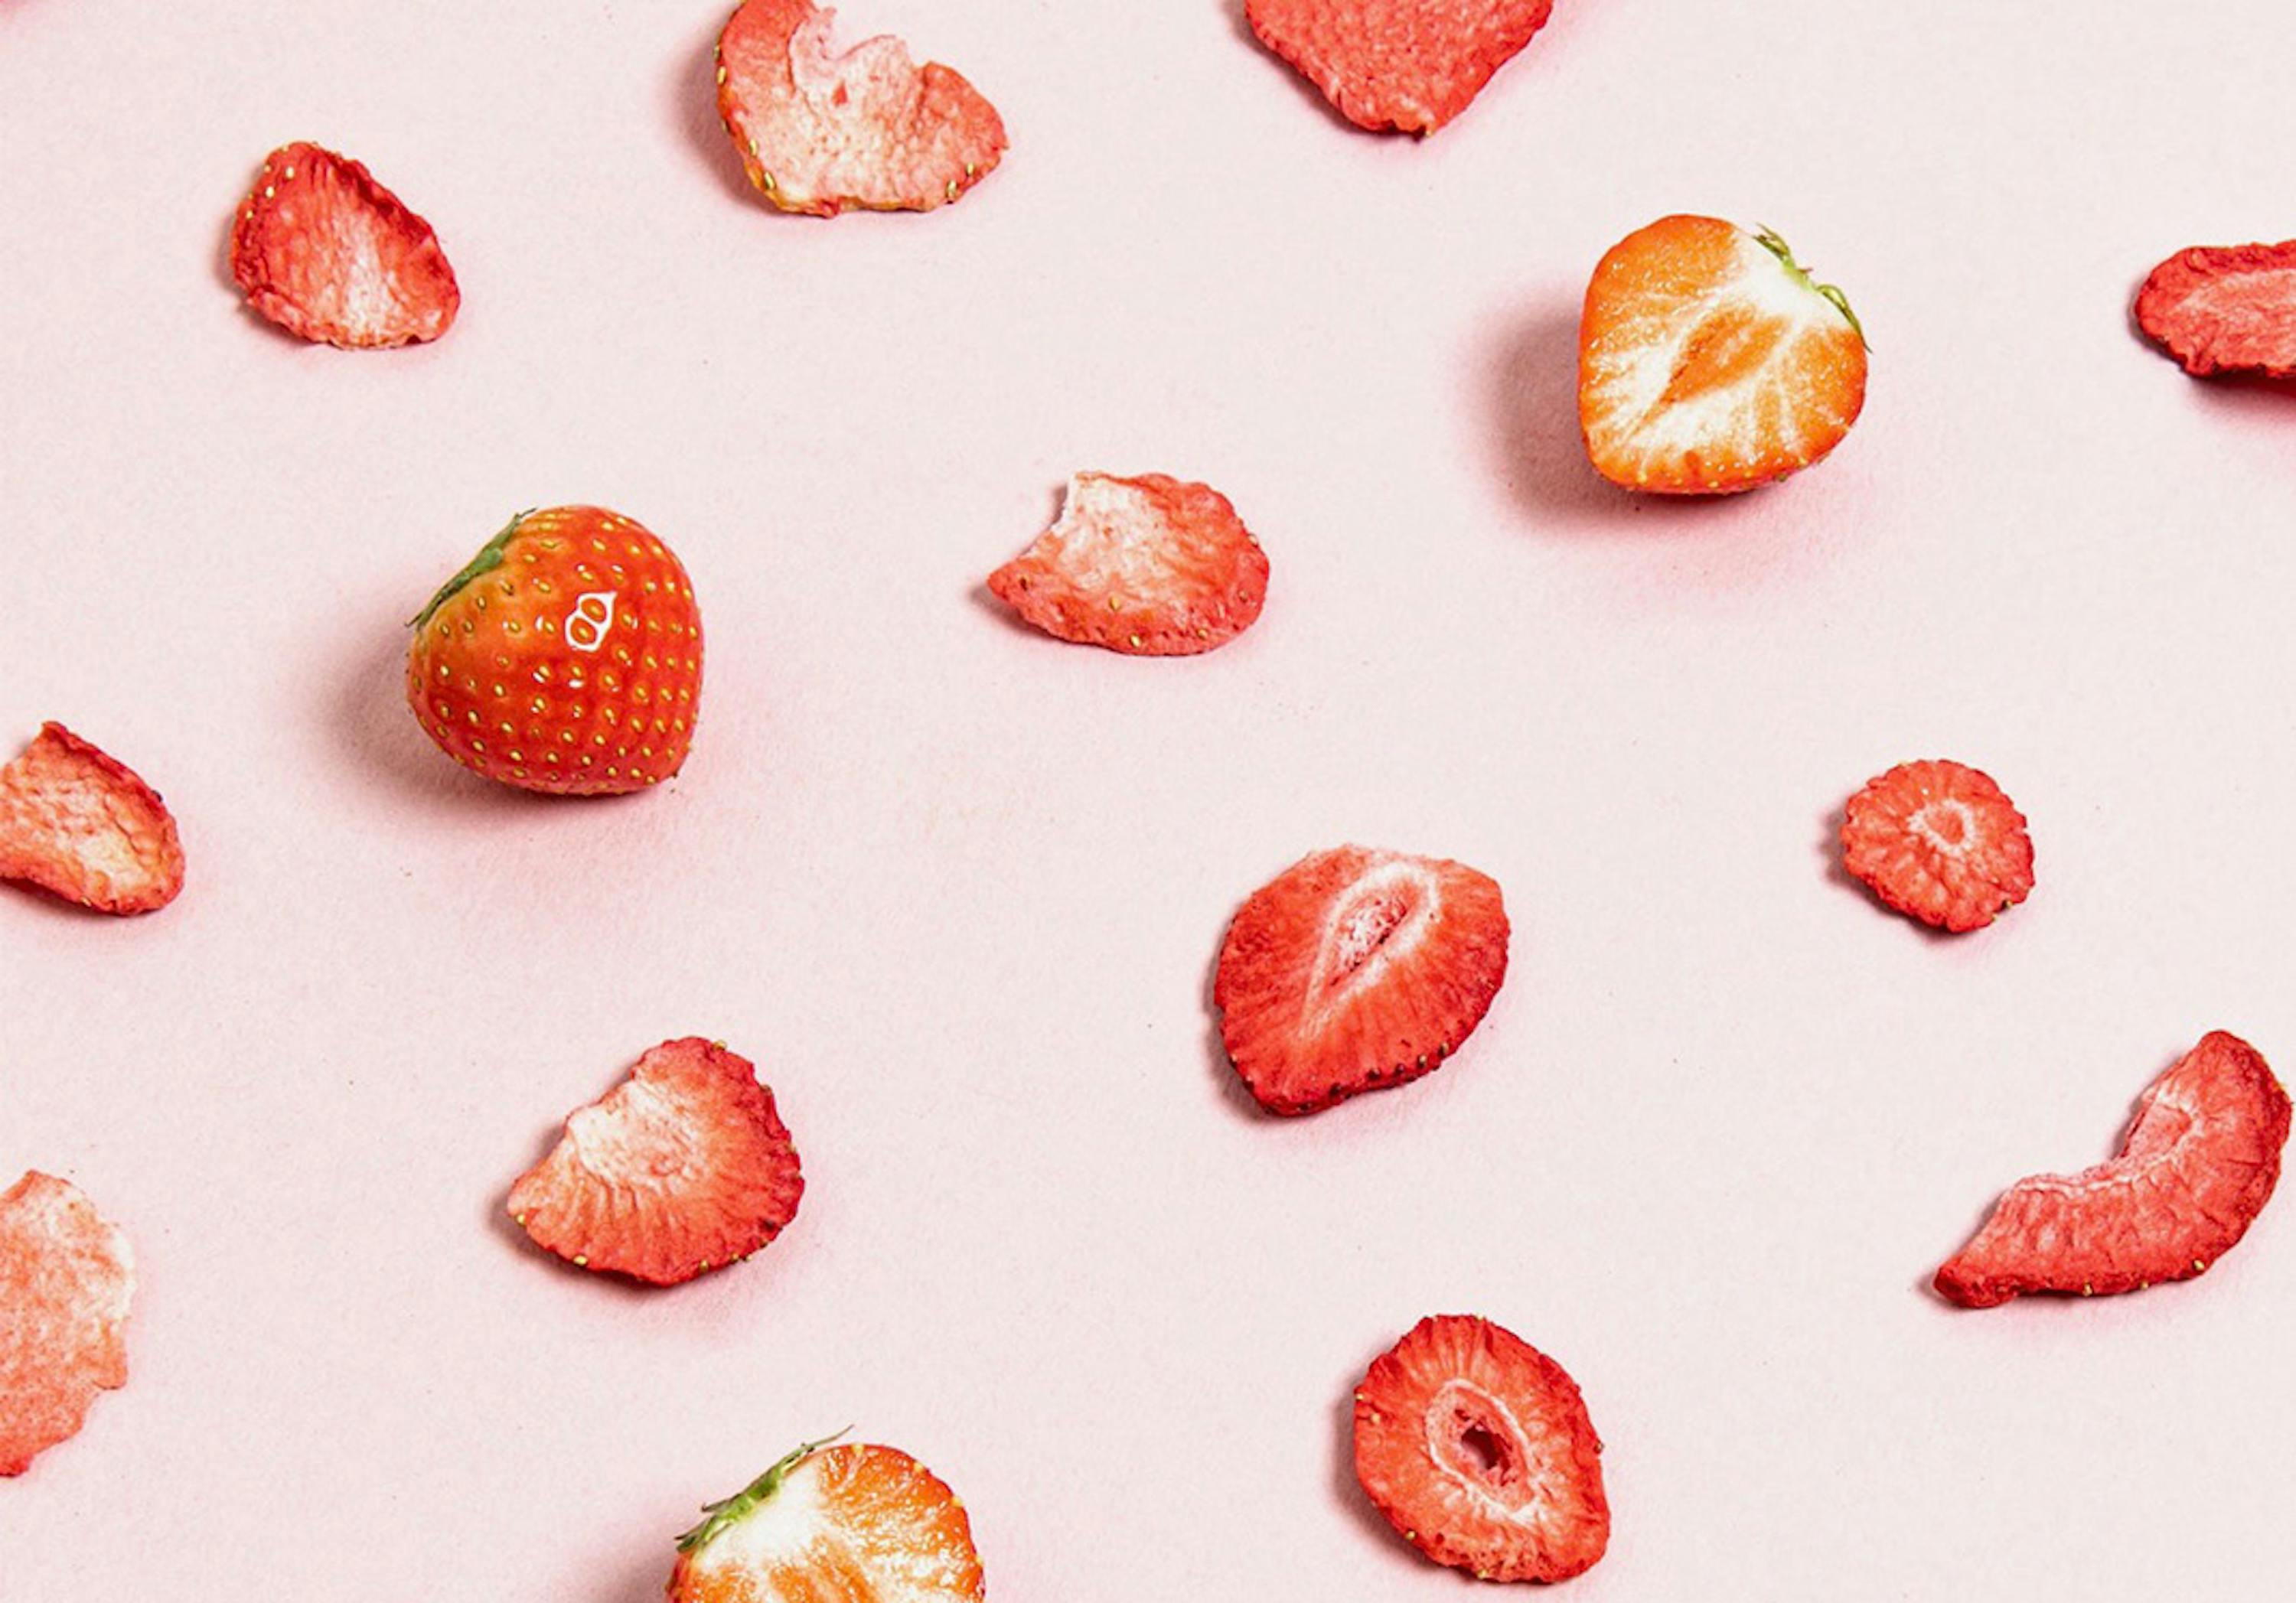 7 ideas for snacking on freeze-dried fruit